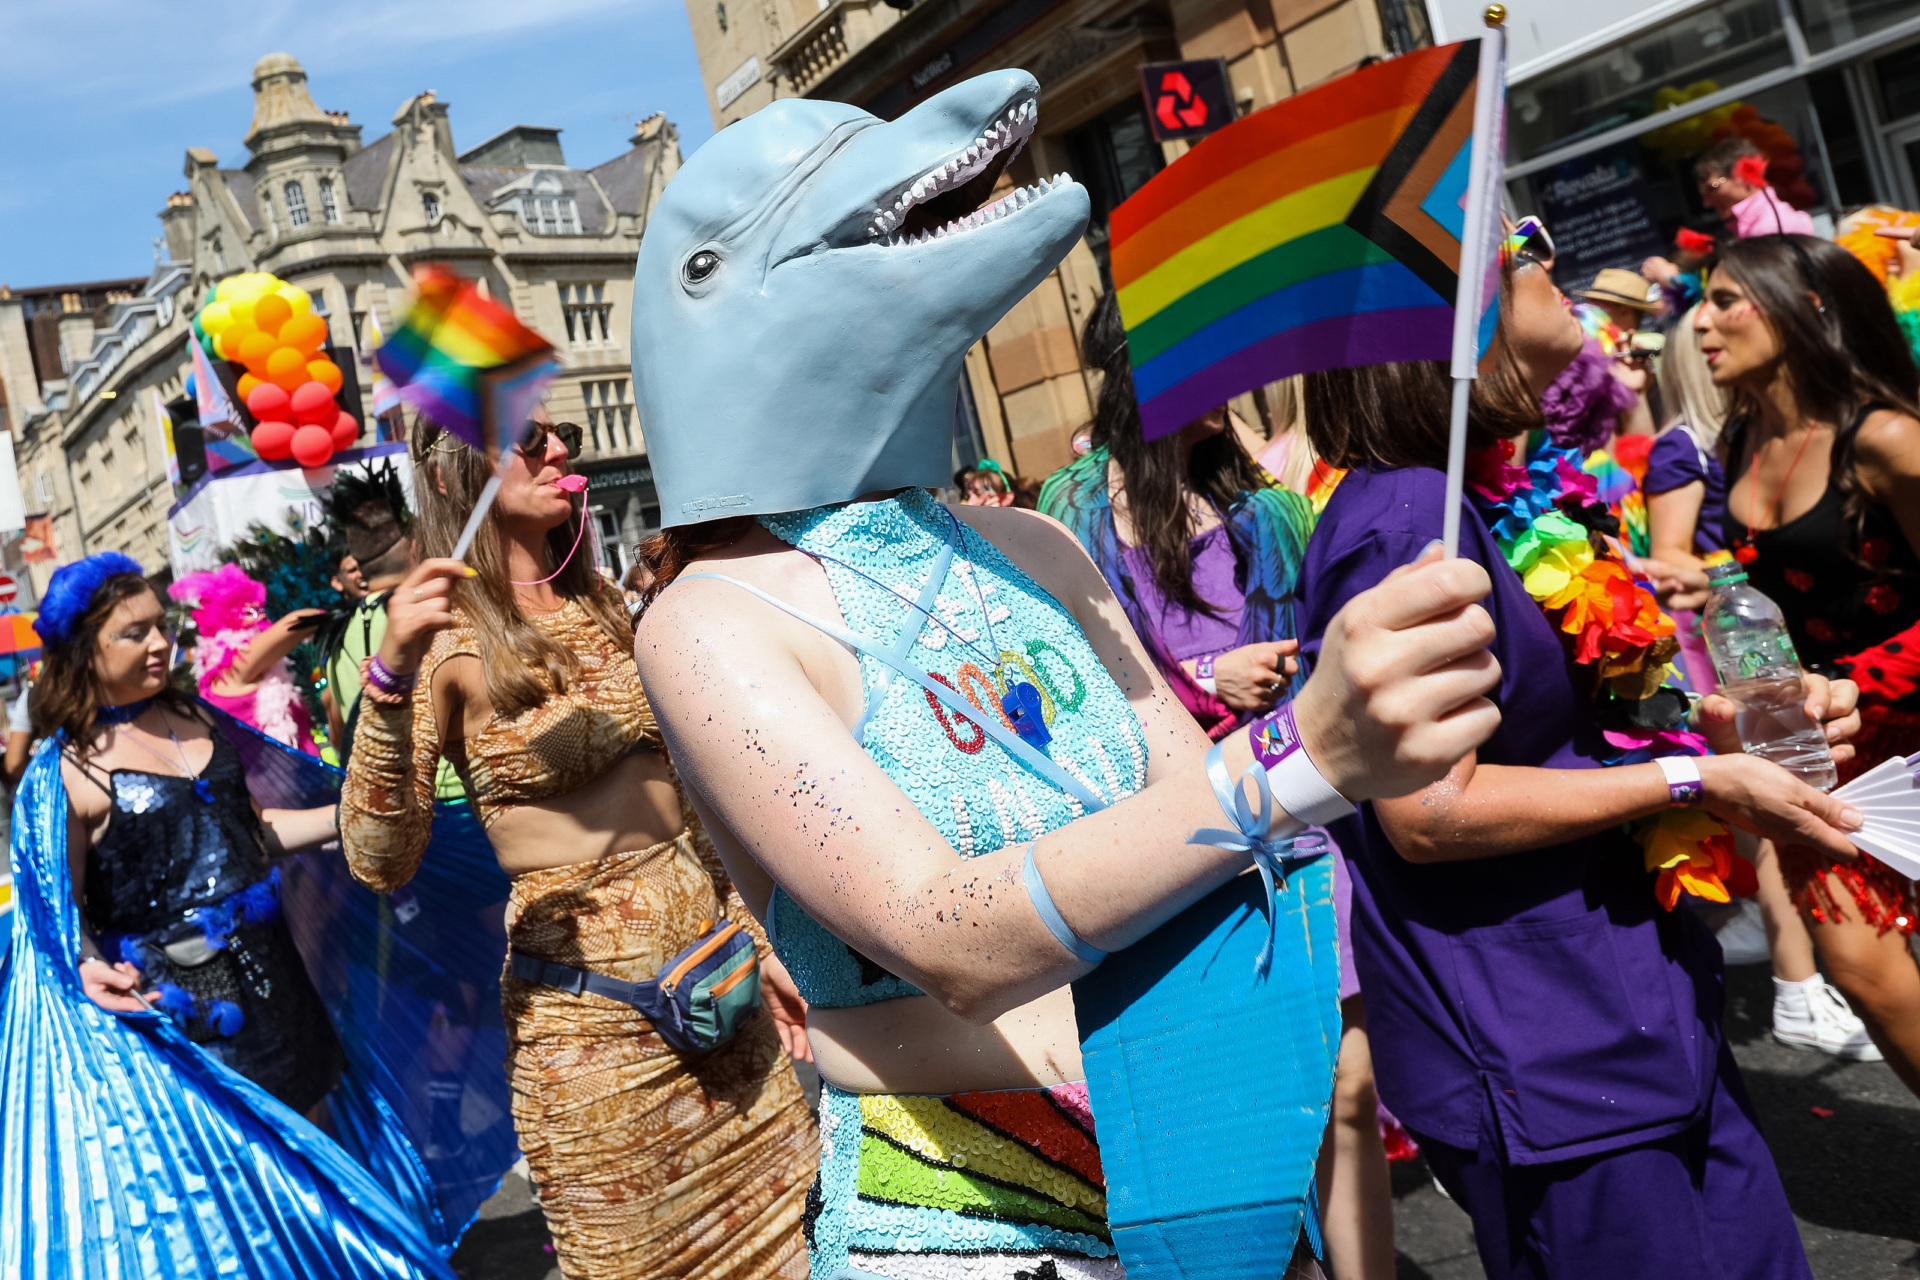  Festival goers participate in the Pride LGBTQ+ Community Parade – ‘Love, Protest & Unity’ during the Brighton Pride on August 06, 2022 in Brighton, England. (Photo by Tristan Fewings/Getty Images)